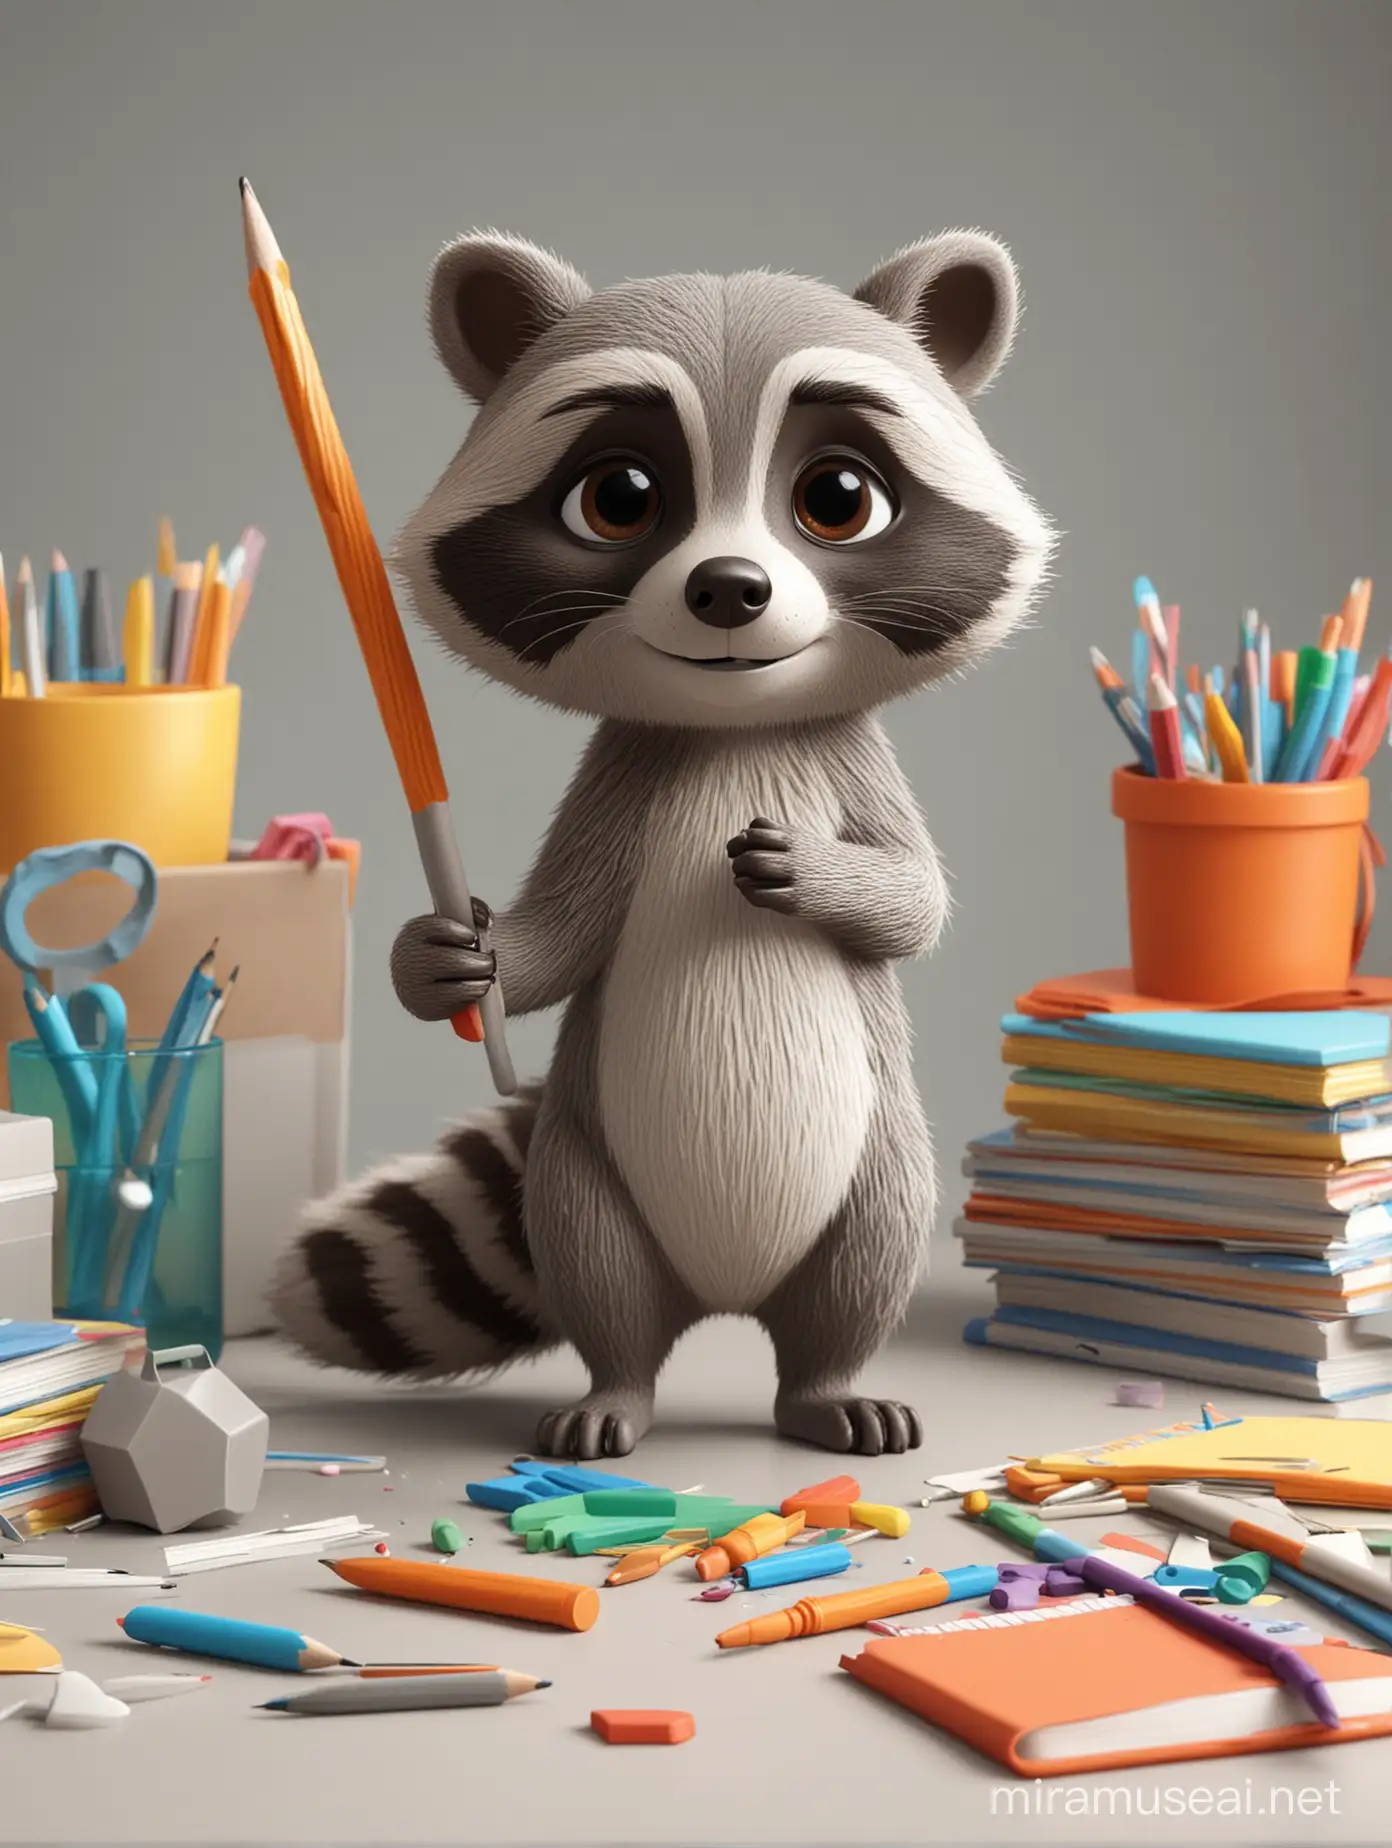 3D gray racoon, lot of big school supplies in the background, extremely simple and plain shapes, clay cartoon style, saturated colors, high resolution